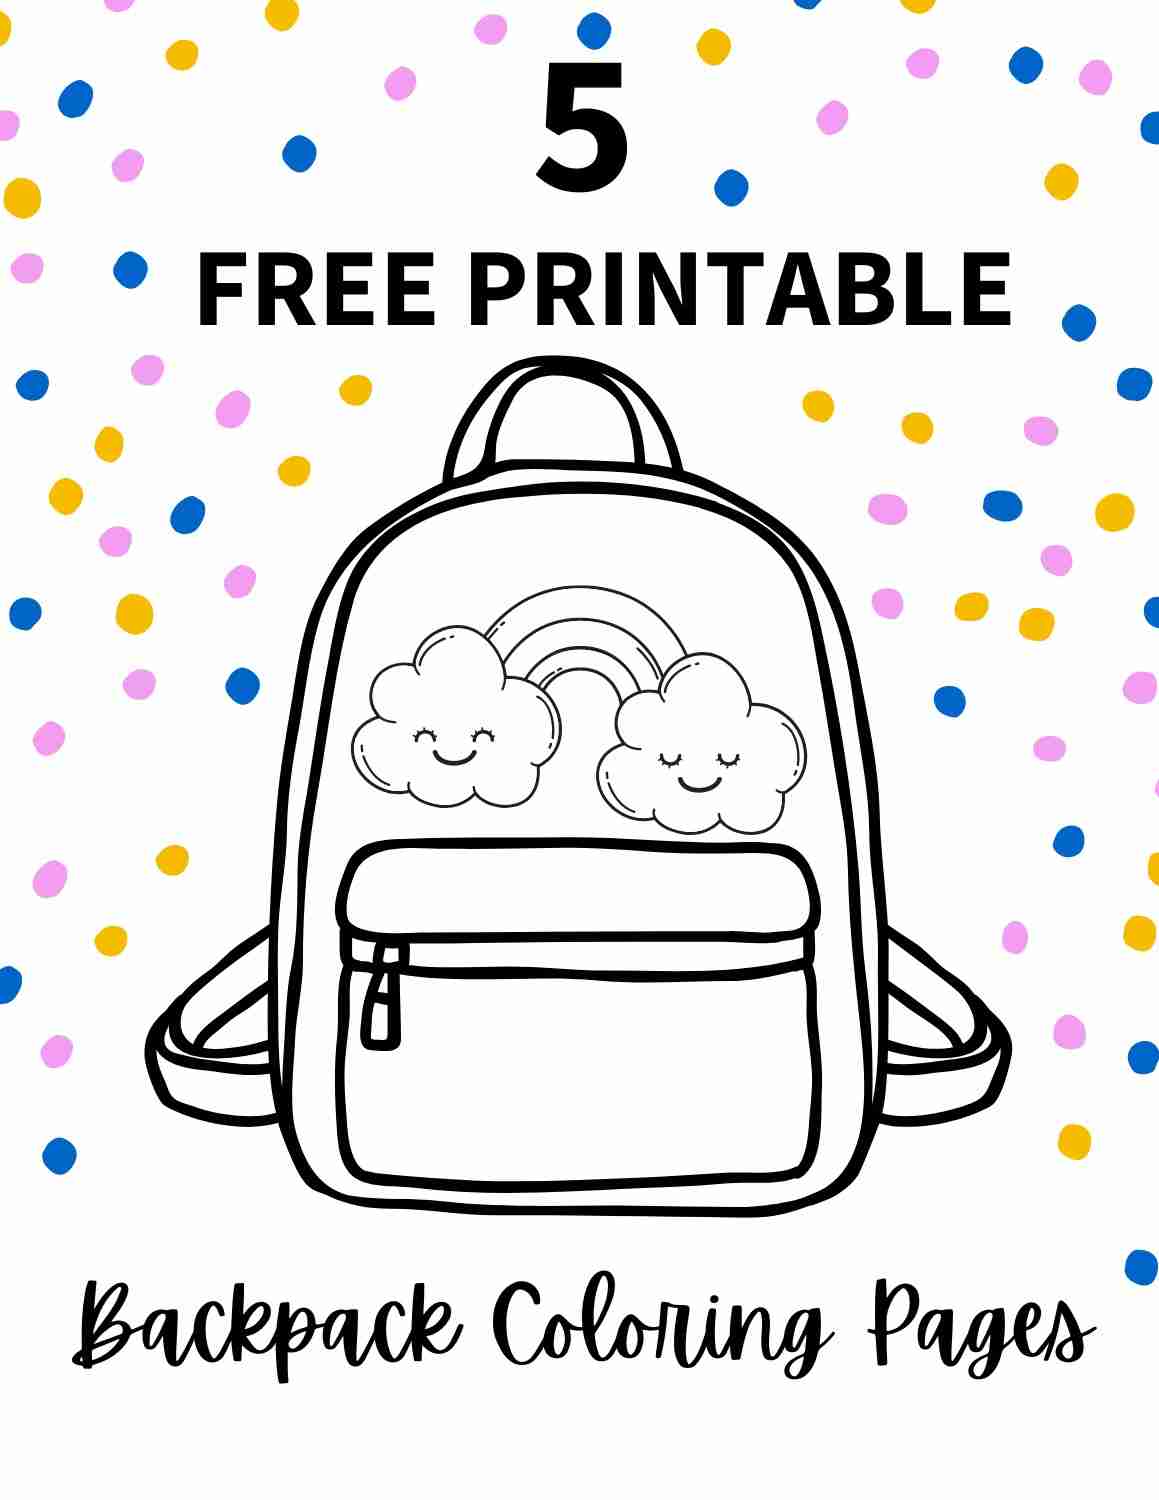 Free printable backpack coloring pages for back to school